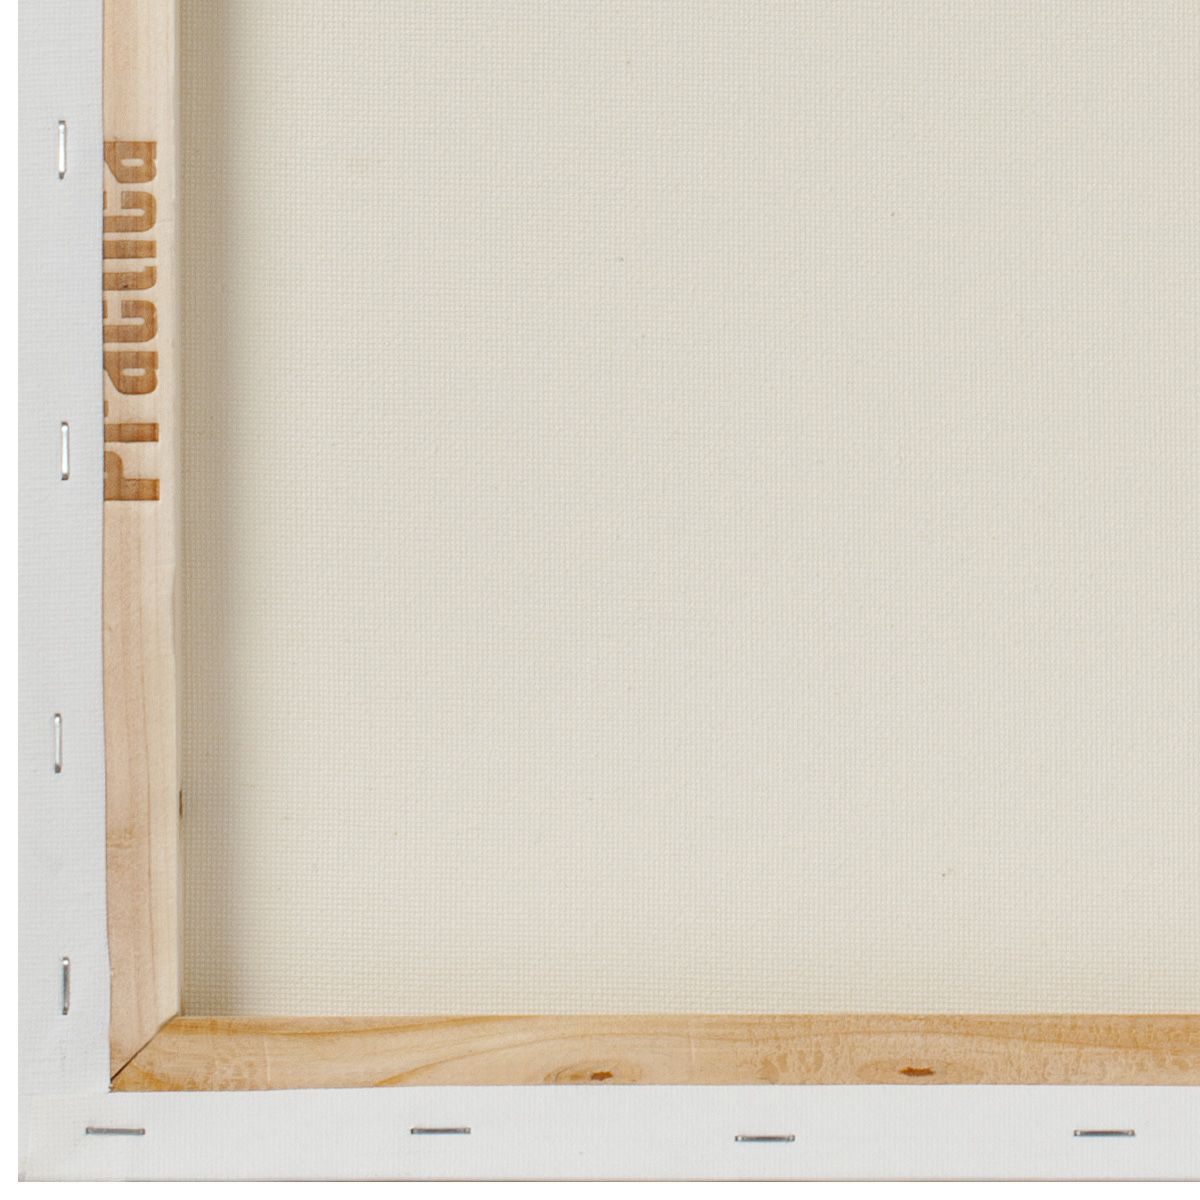 Back stapled for clean, paintable edges - BEST Selling Canvas!